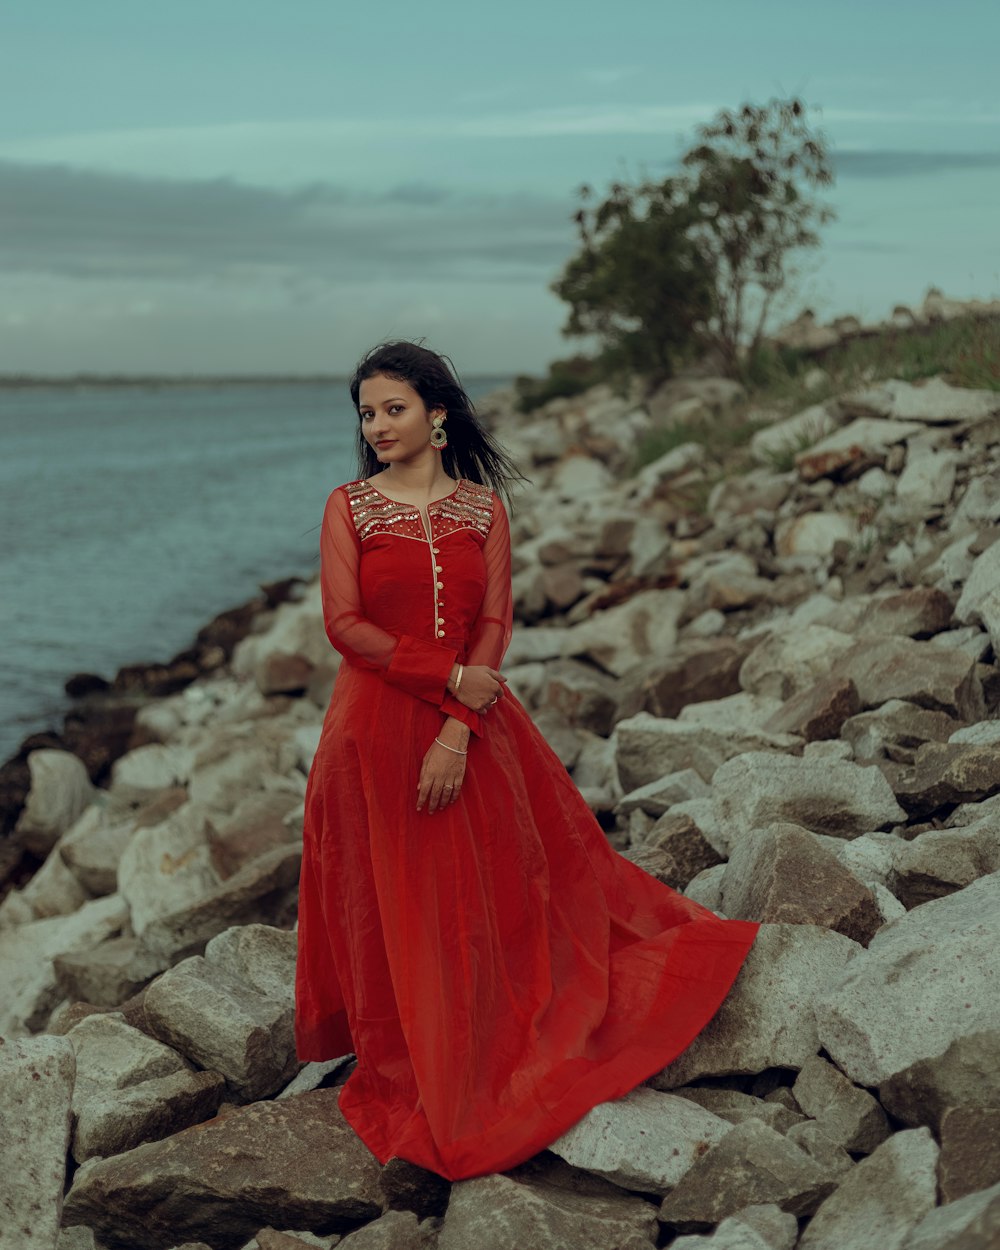 a woman in a red dress standing on rocks by the water